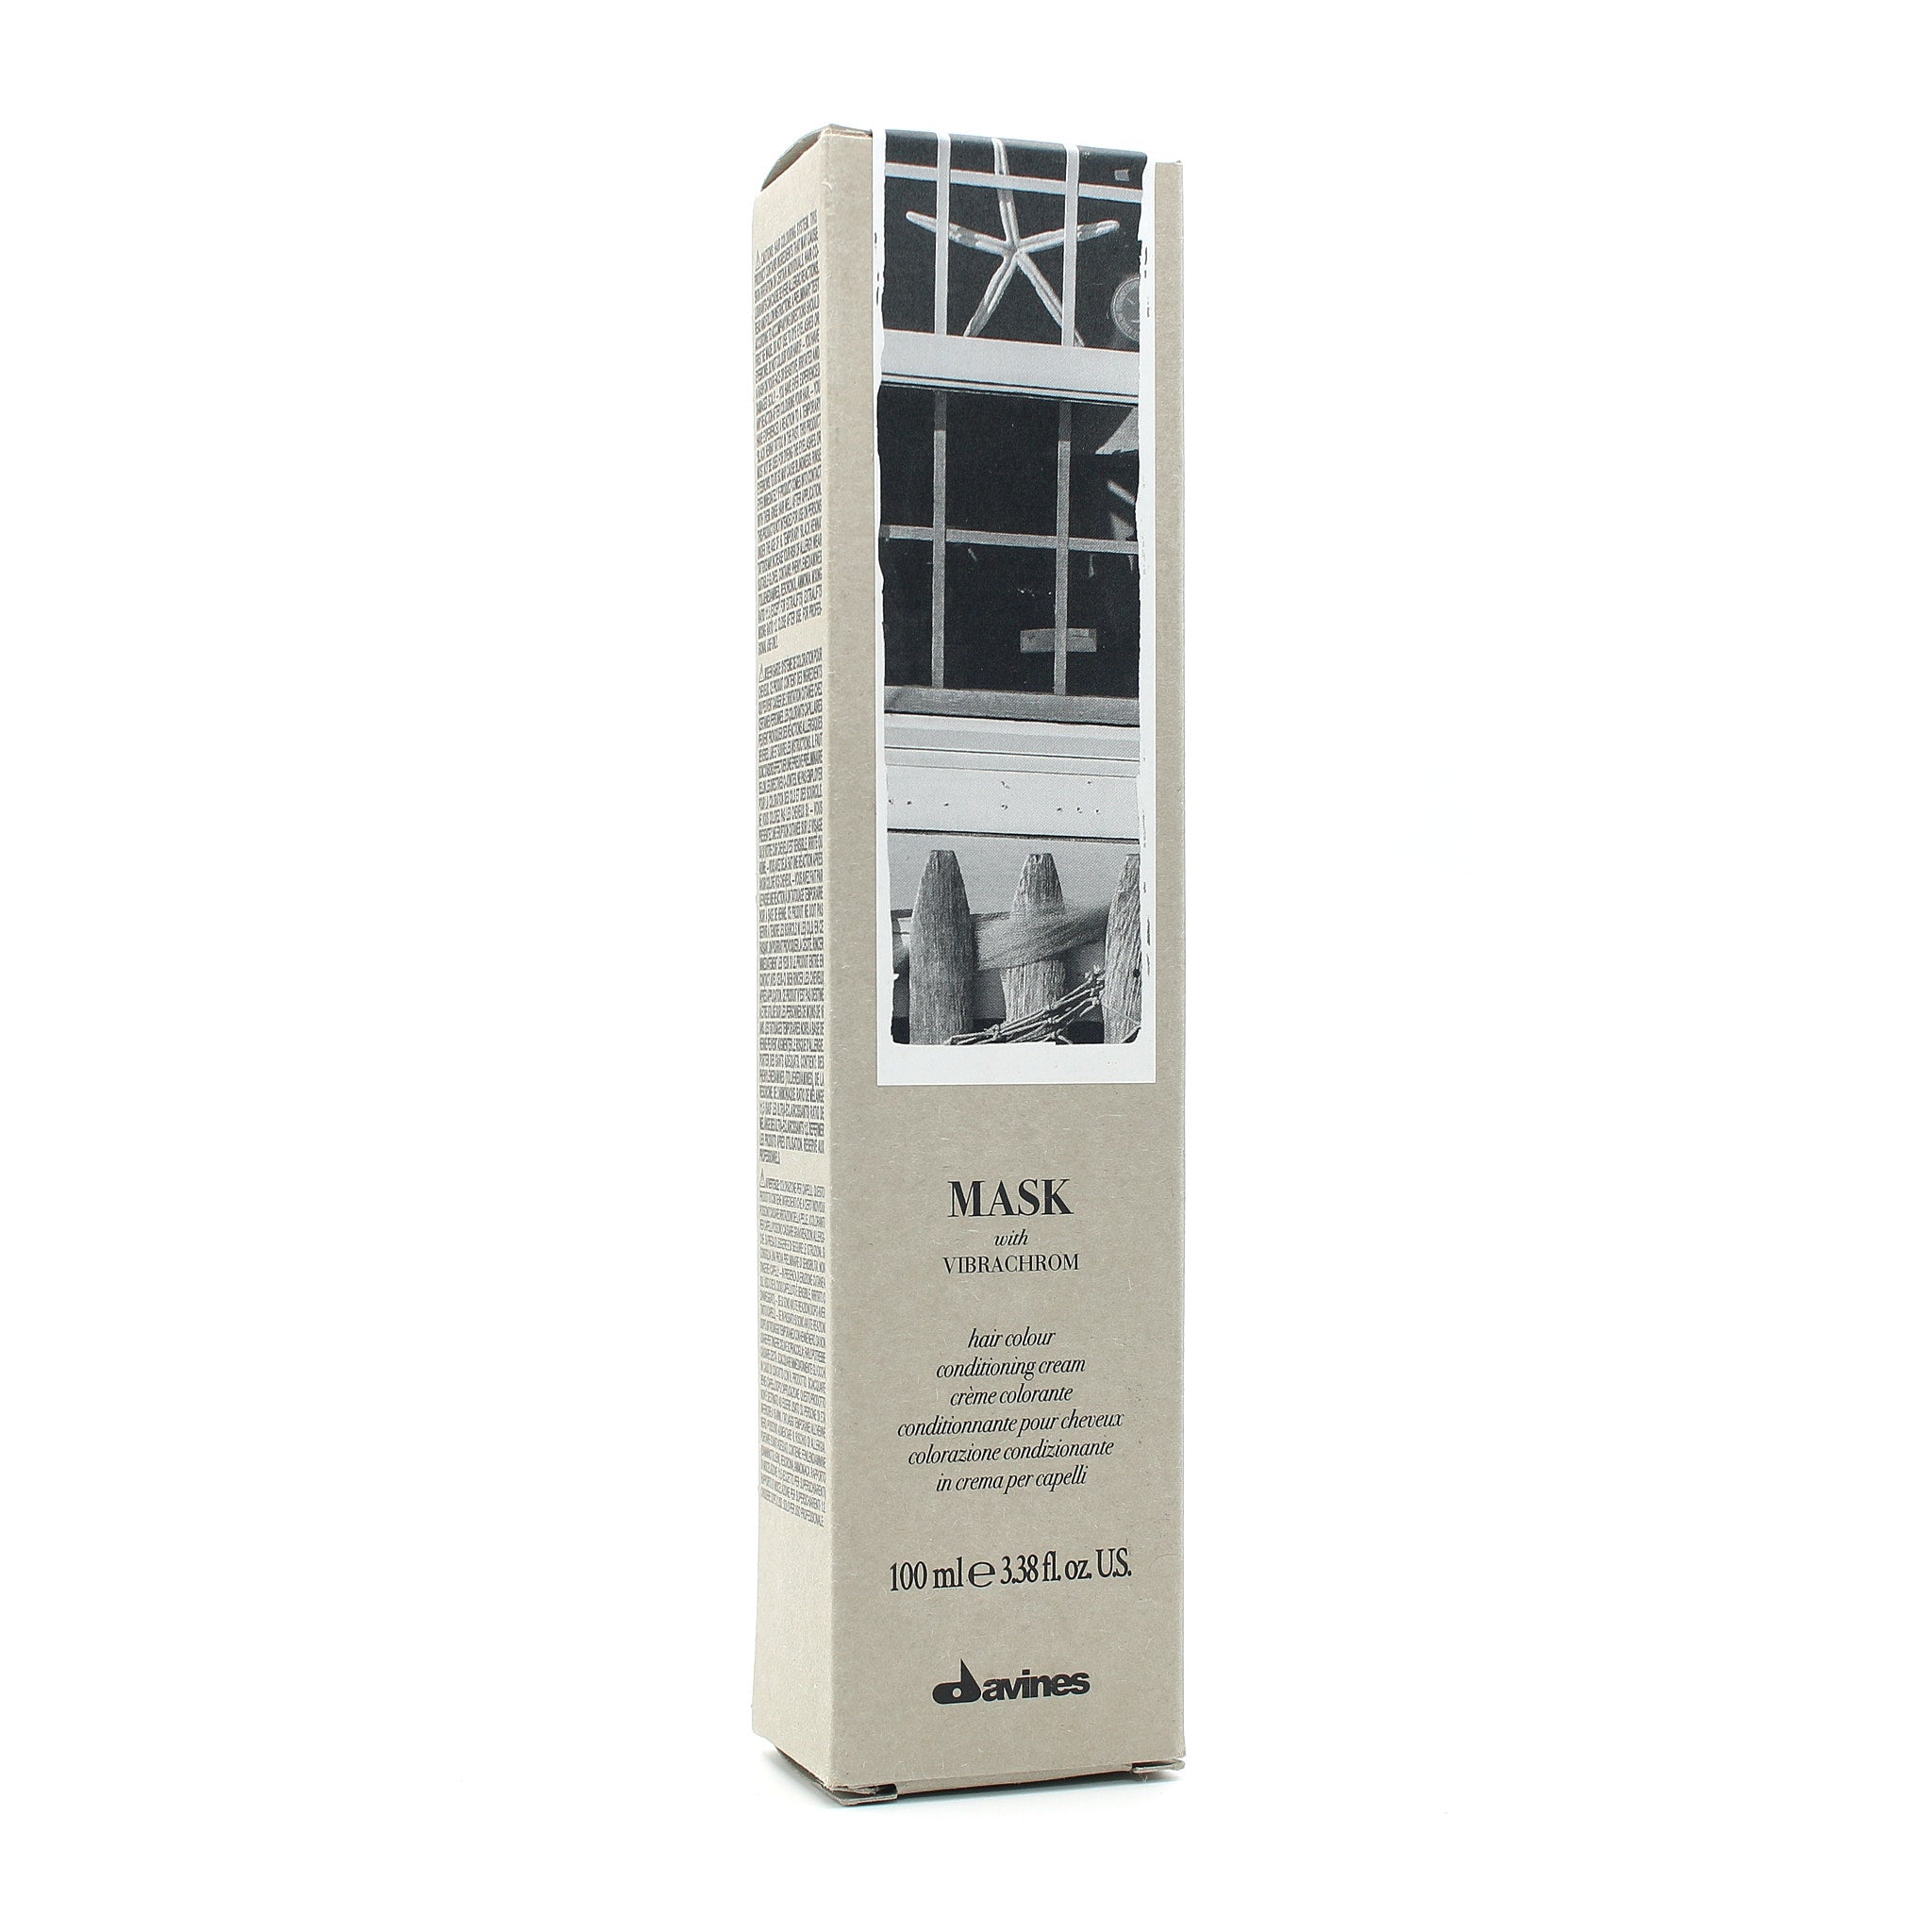 DAVINES Mask with Vibracrom 0,12 Hair Color Conditioning Cream 3.38 oz